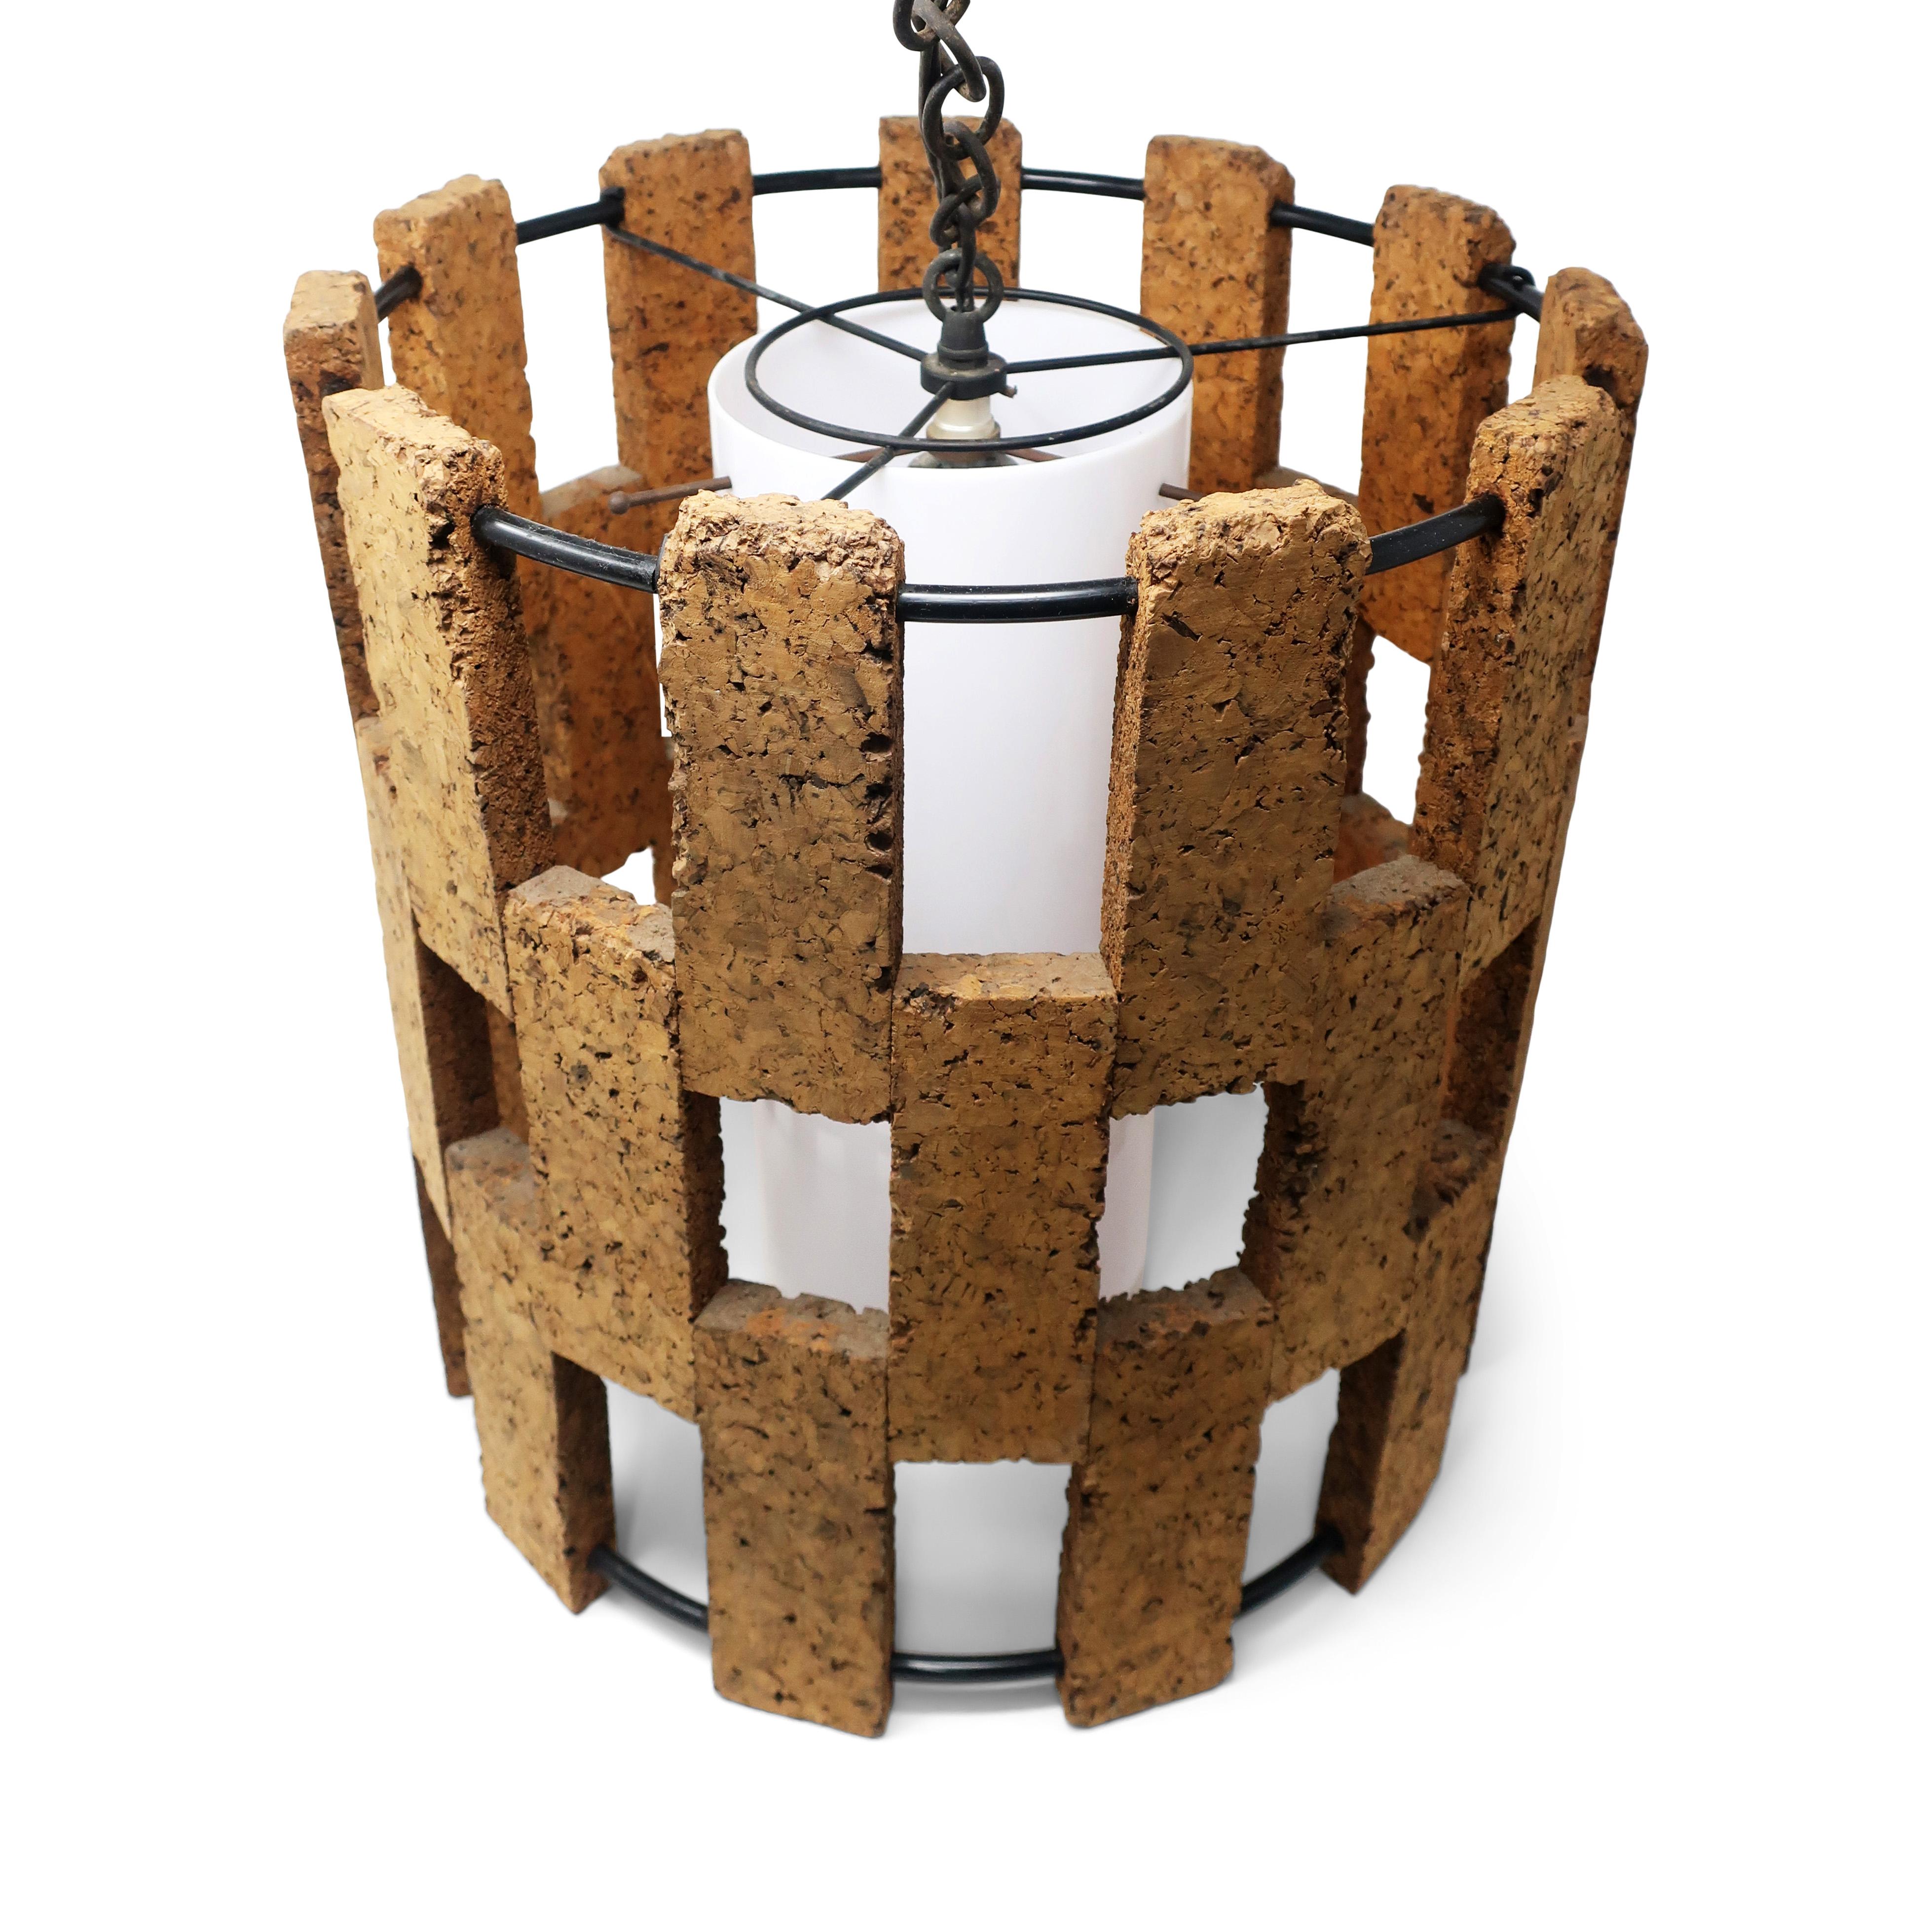 A lovely vintage cork swag lamp with alternating pieces of cork and open space held together by black metal wire, all surrounding an interior opaque white cylindrical diffuser. On/off switch is on the cord, which is threaded through a 20+ foot